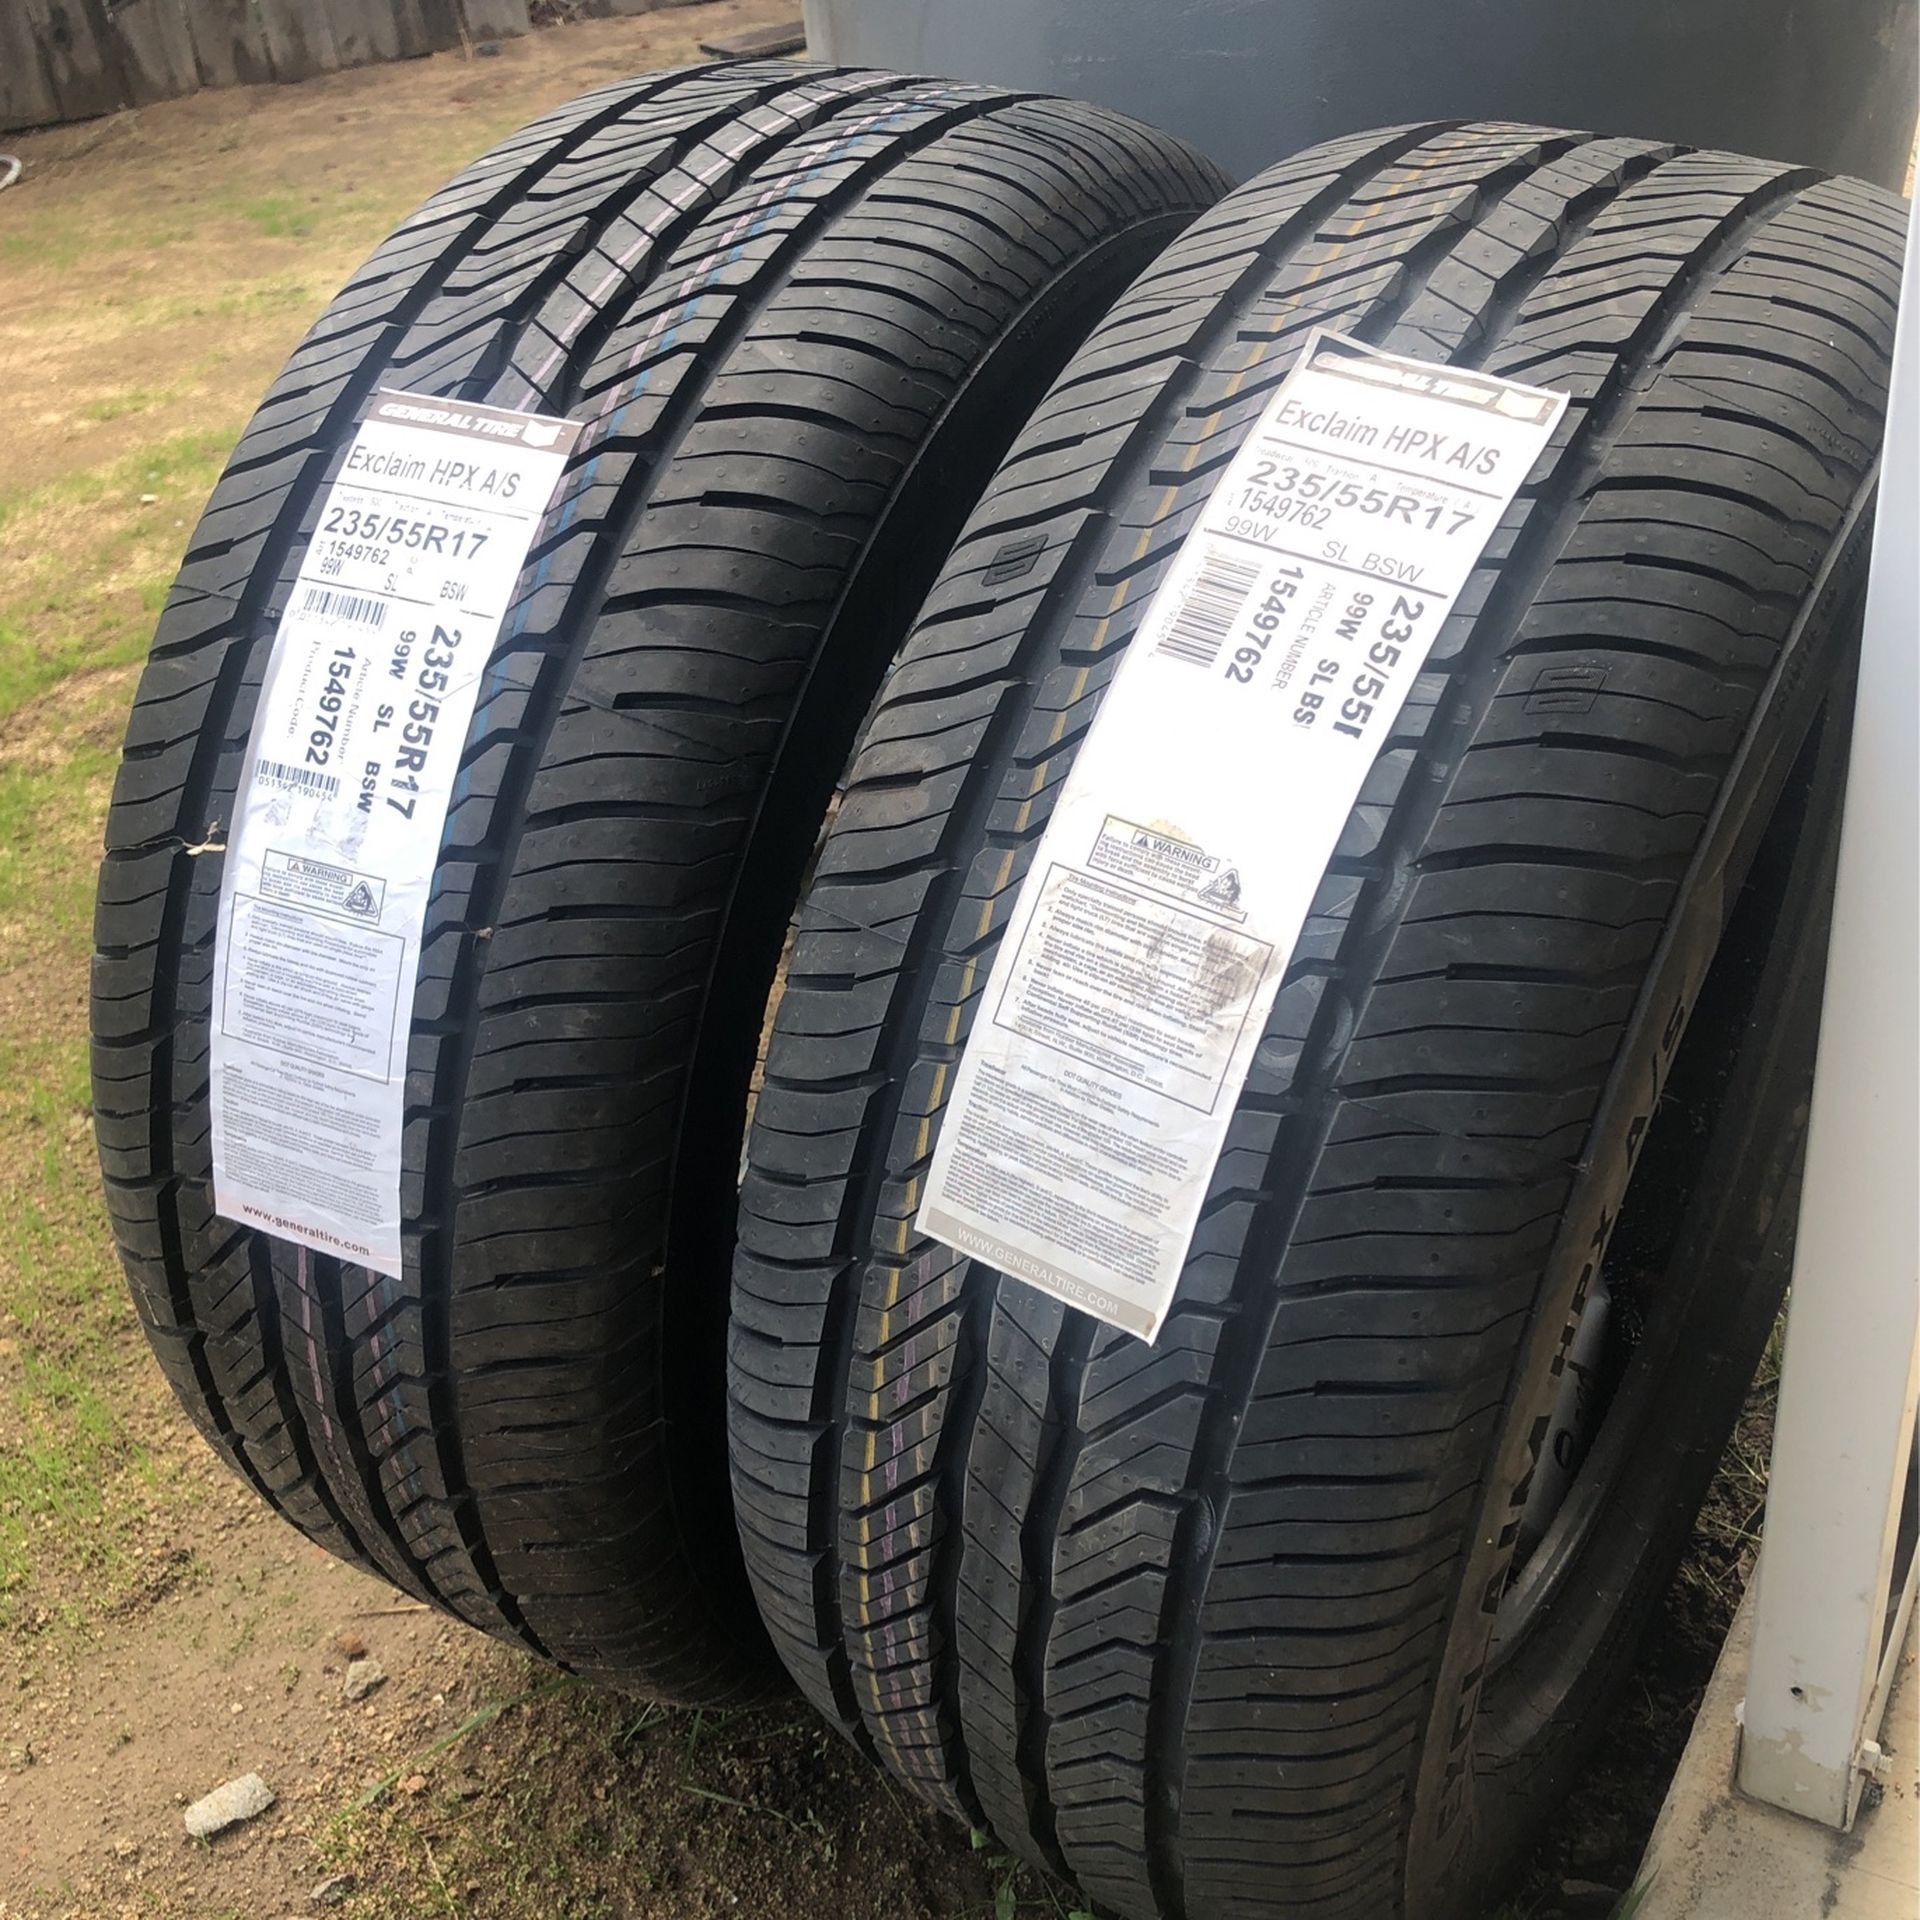 Exclaim HPX A/S 235/55R17